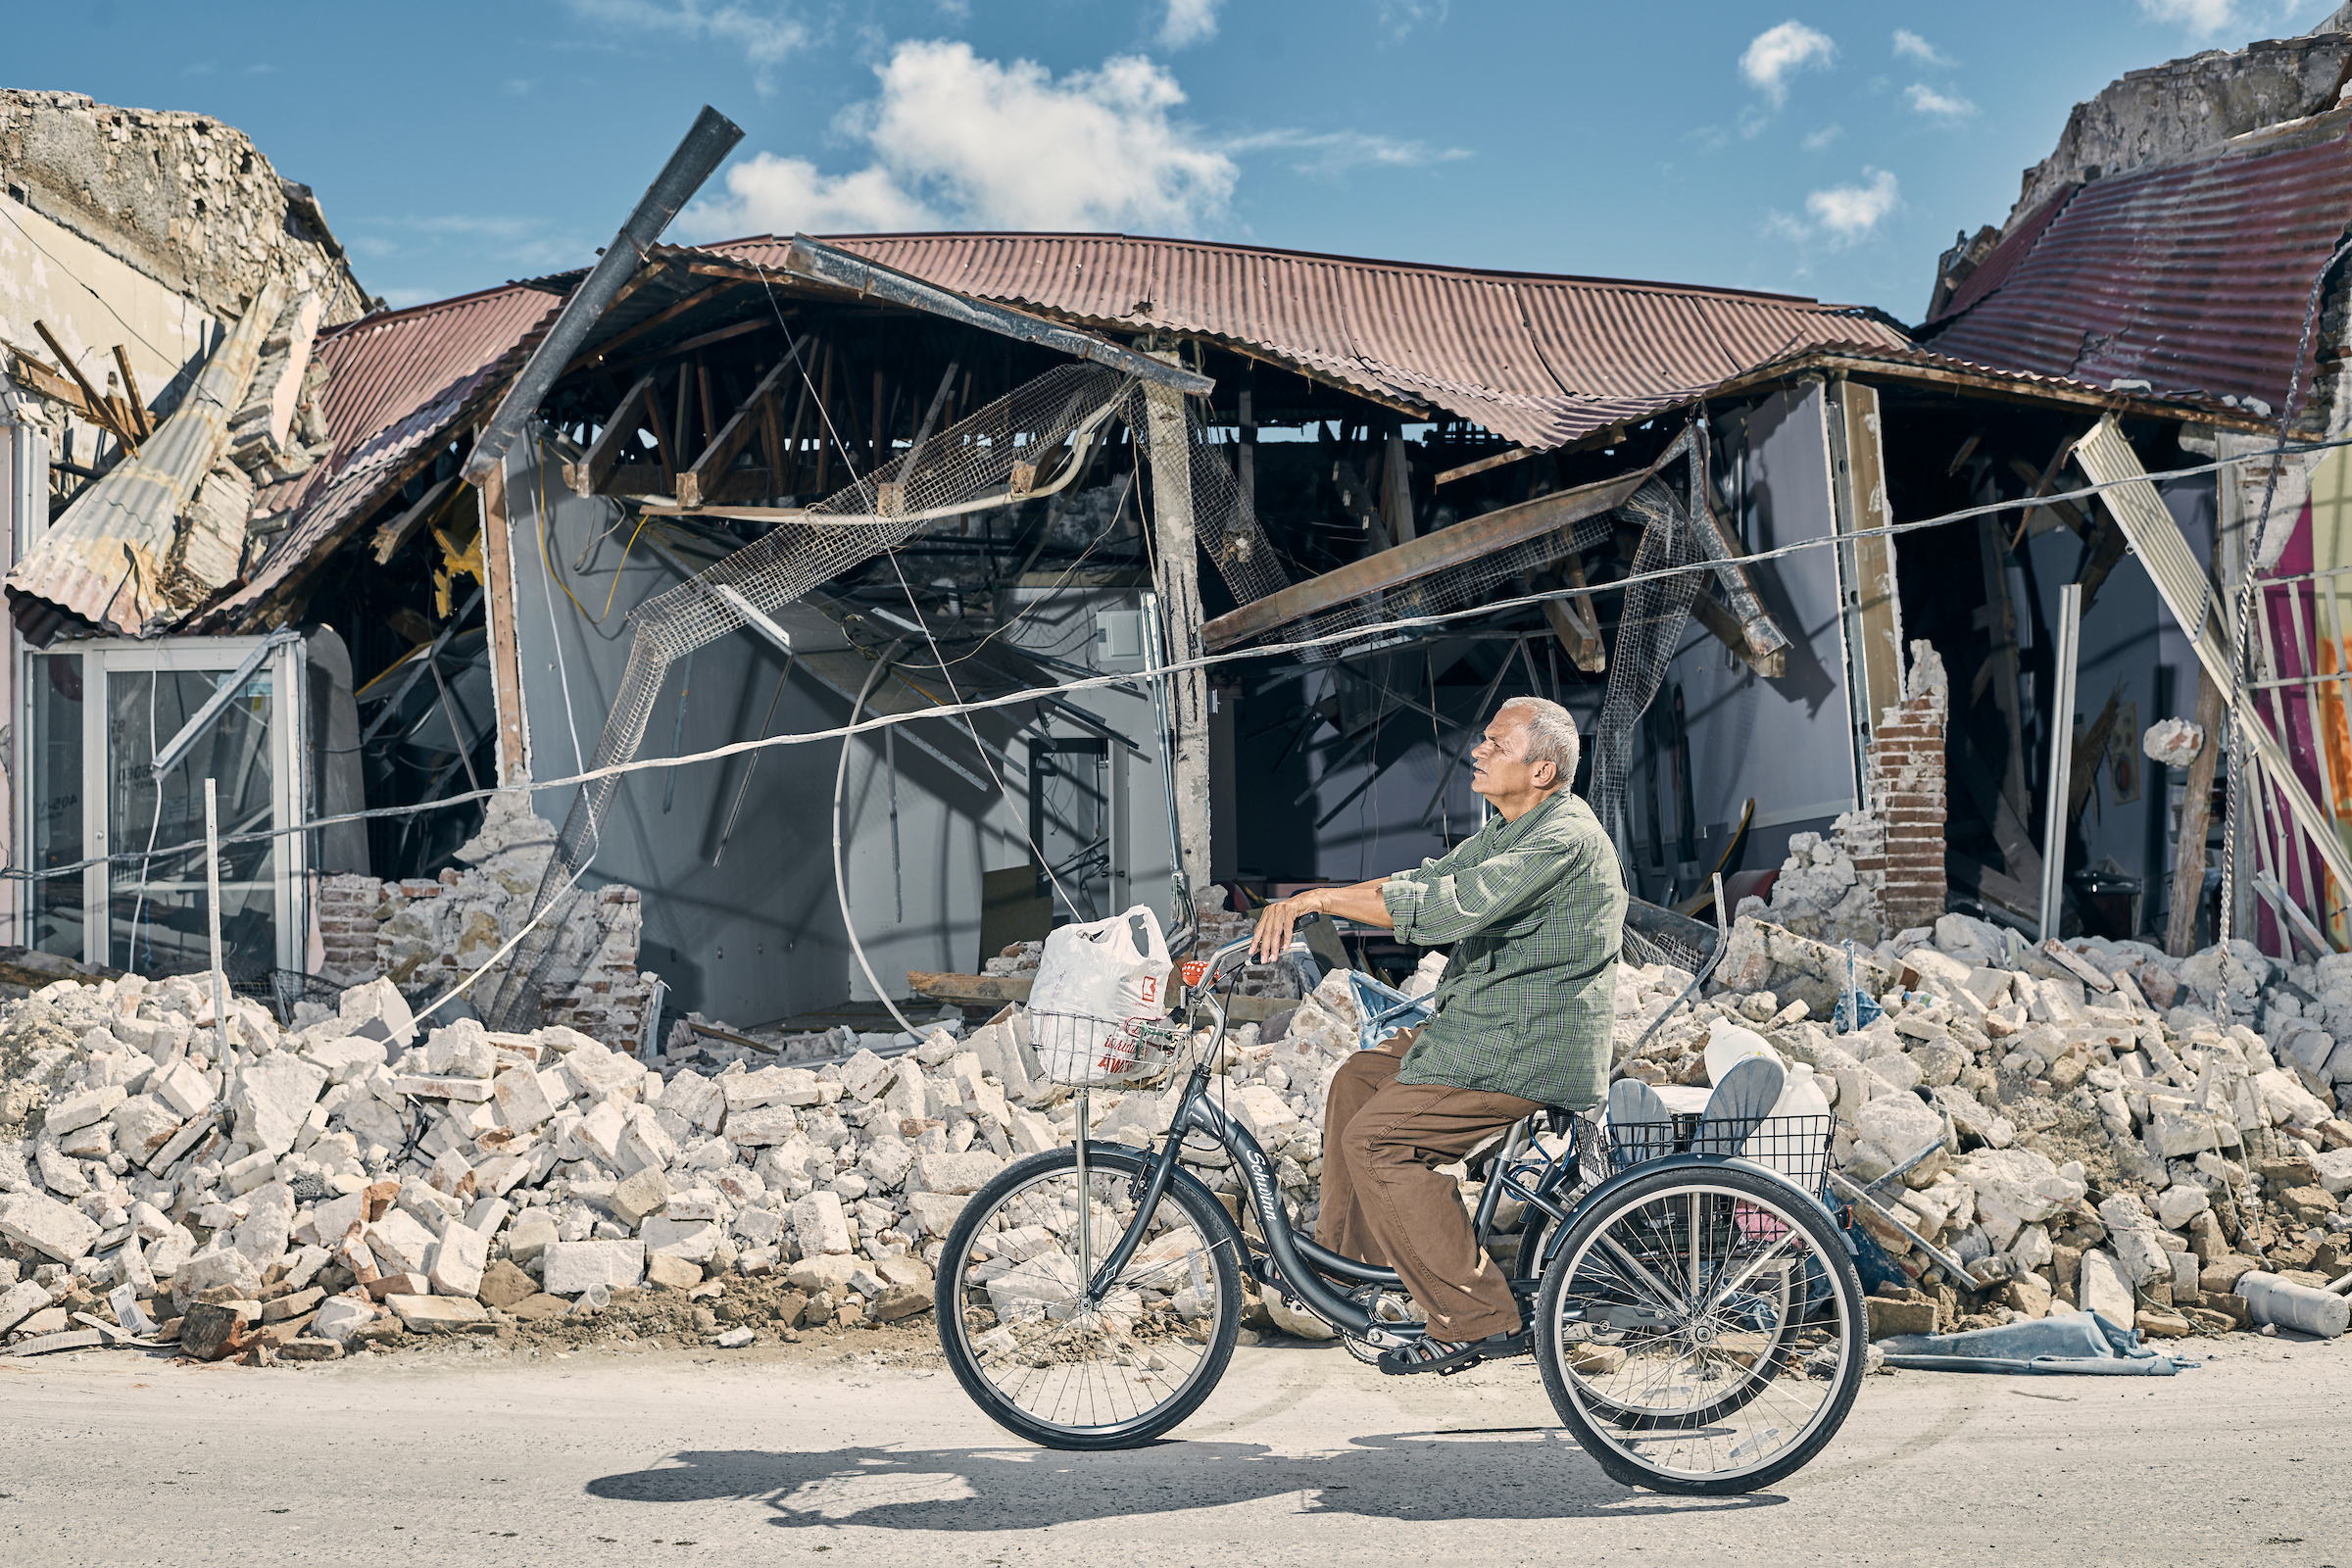 A man rides his tricycle in front of earthquake-destroyed buildings in the town center of Guanica, Puerto Rico, on Jan. 8. (Christopher Gregory-Rivera for TIME)